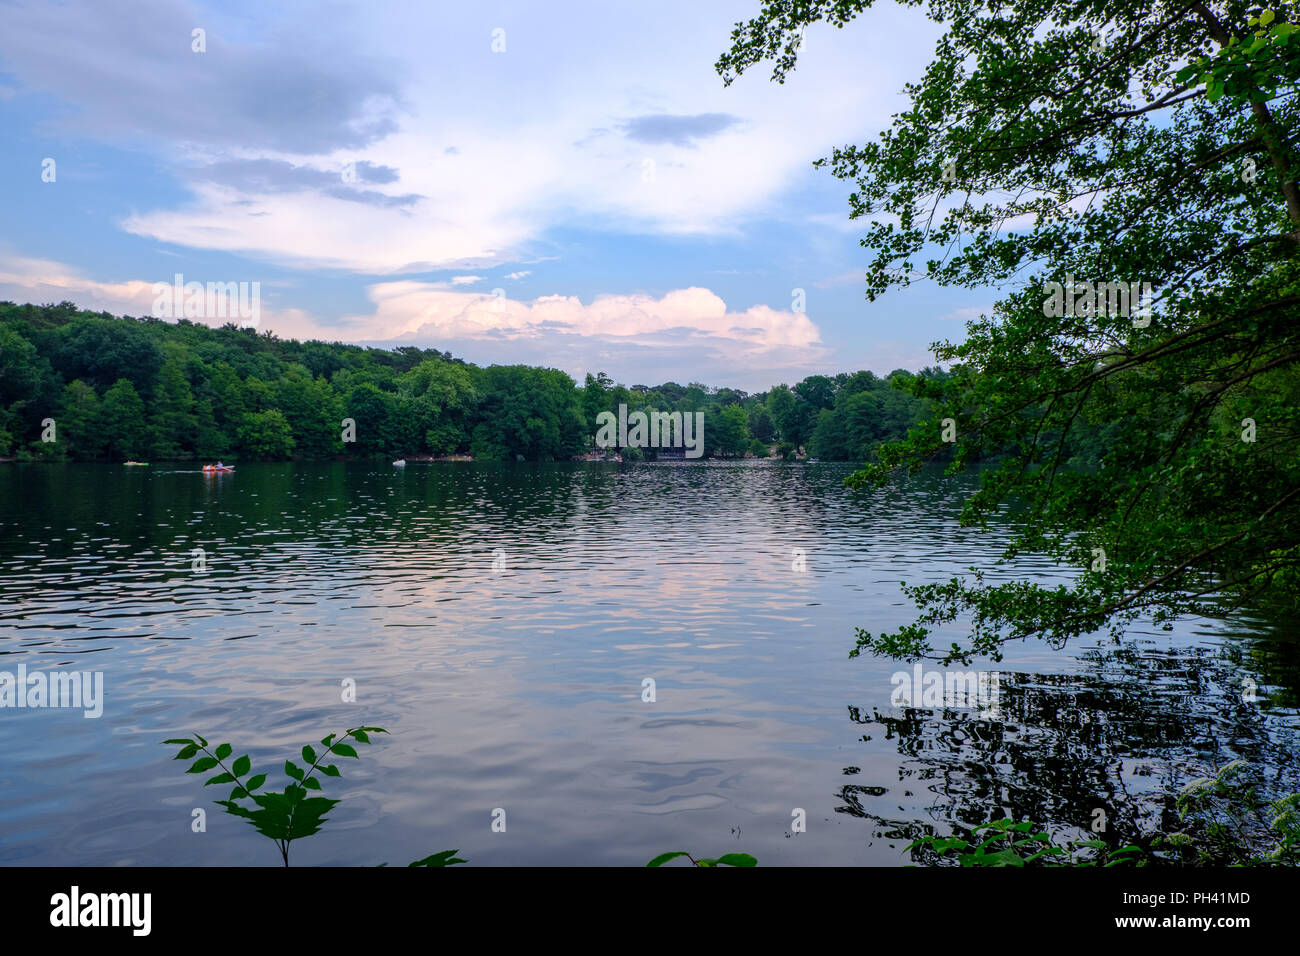 Greenery on the shore of lake Schlachtensee in Berlin, Germany. Stock Photo